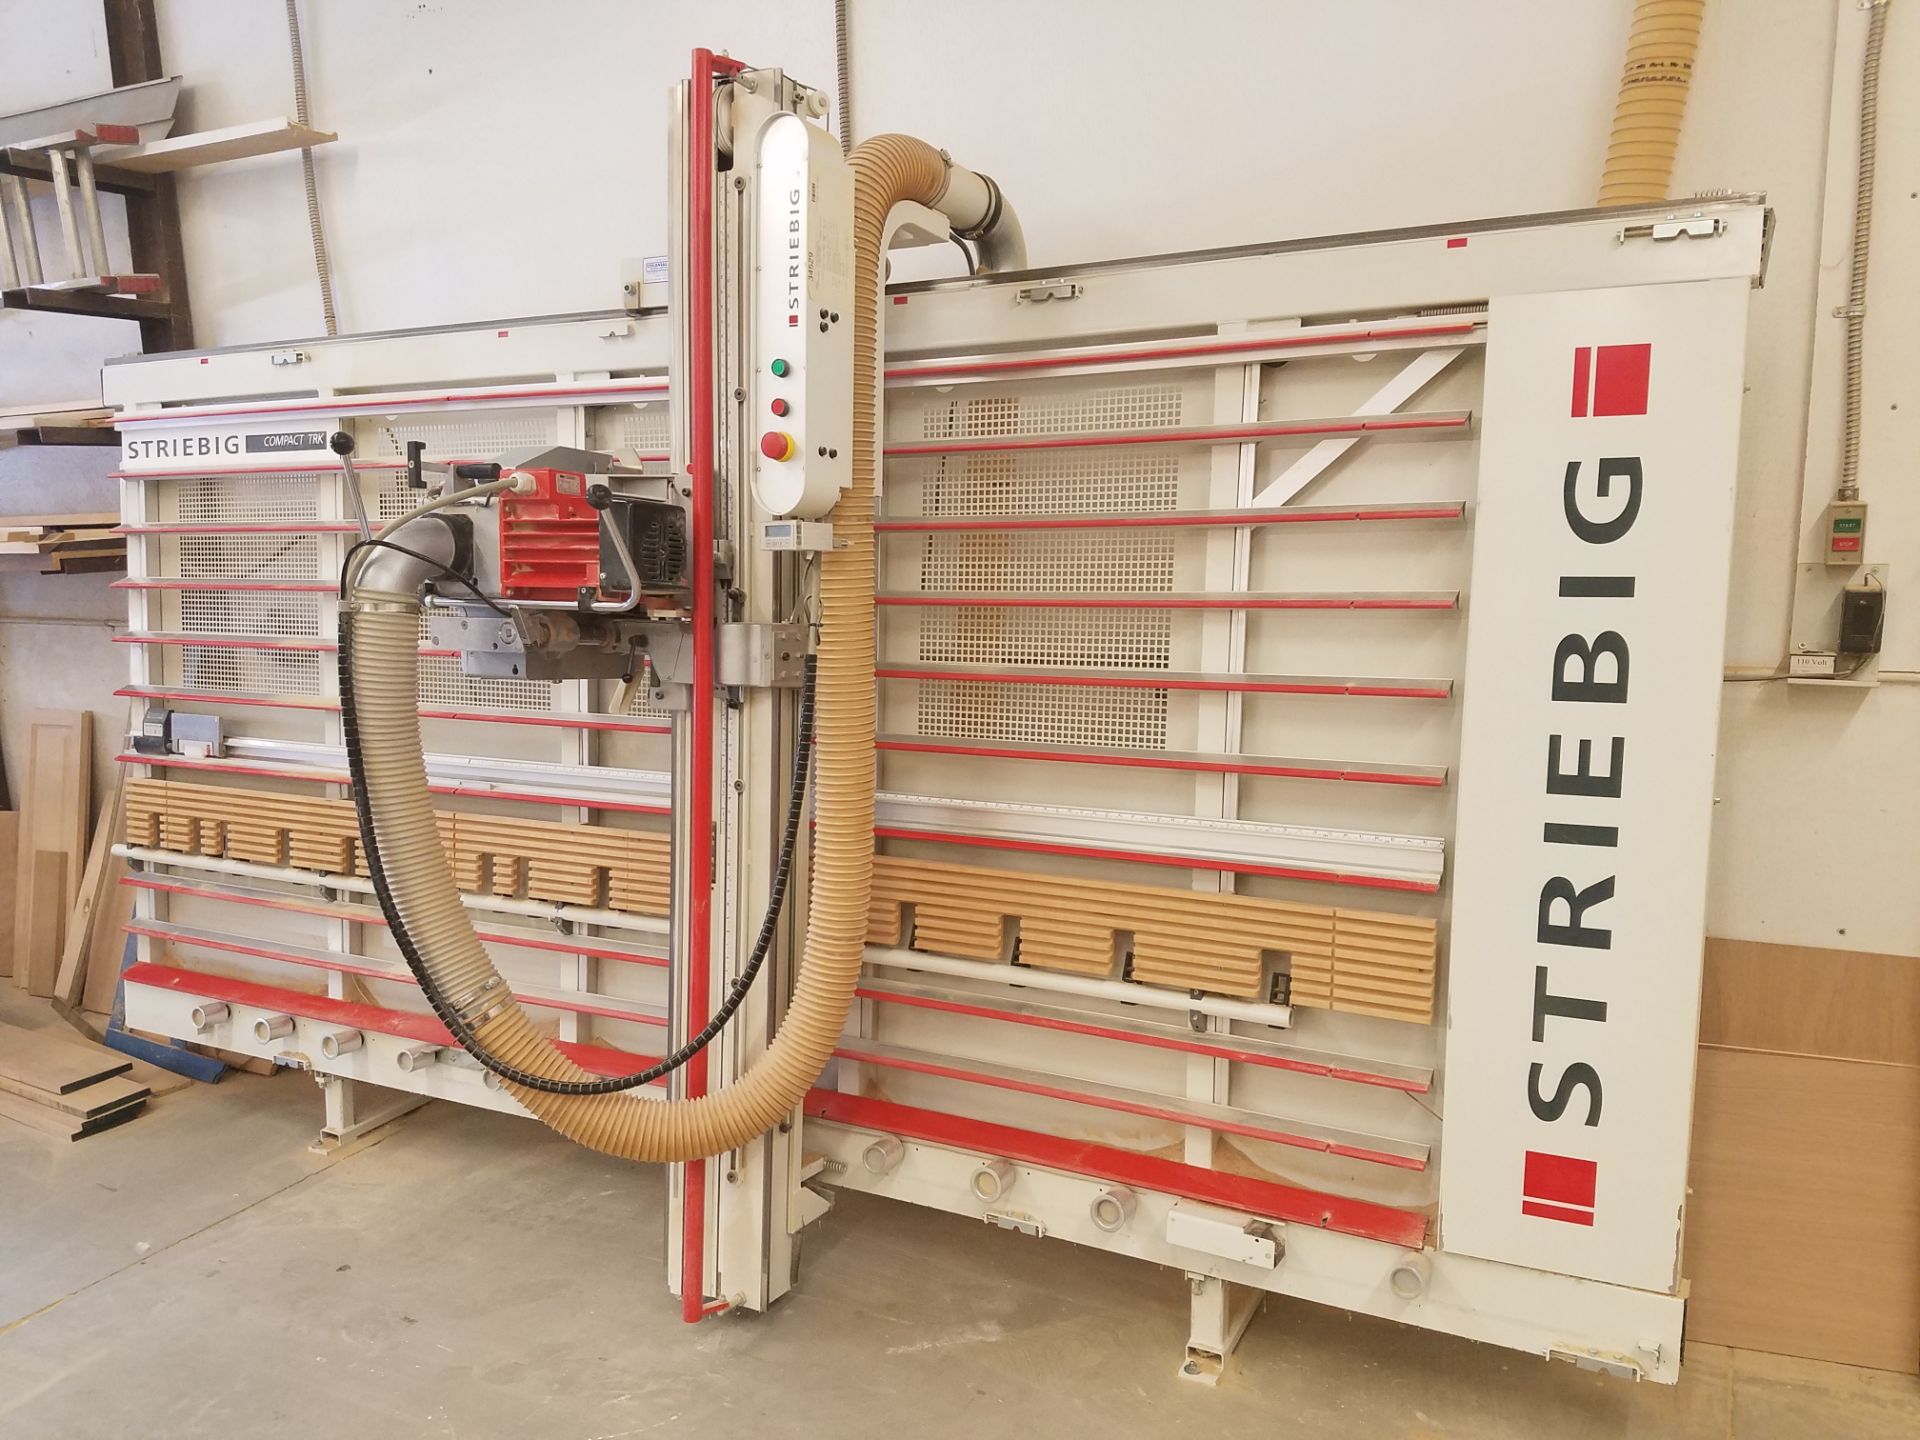 Striebig Model Compact TRK, Type 4164C Heavy Duty Vertical Panel Saw, 134” L/R, 62” Vertical, - Image 2 of 8